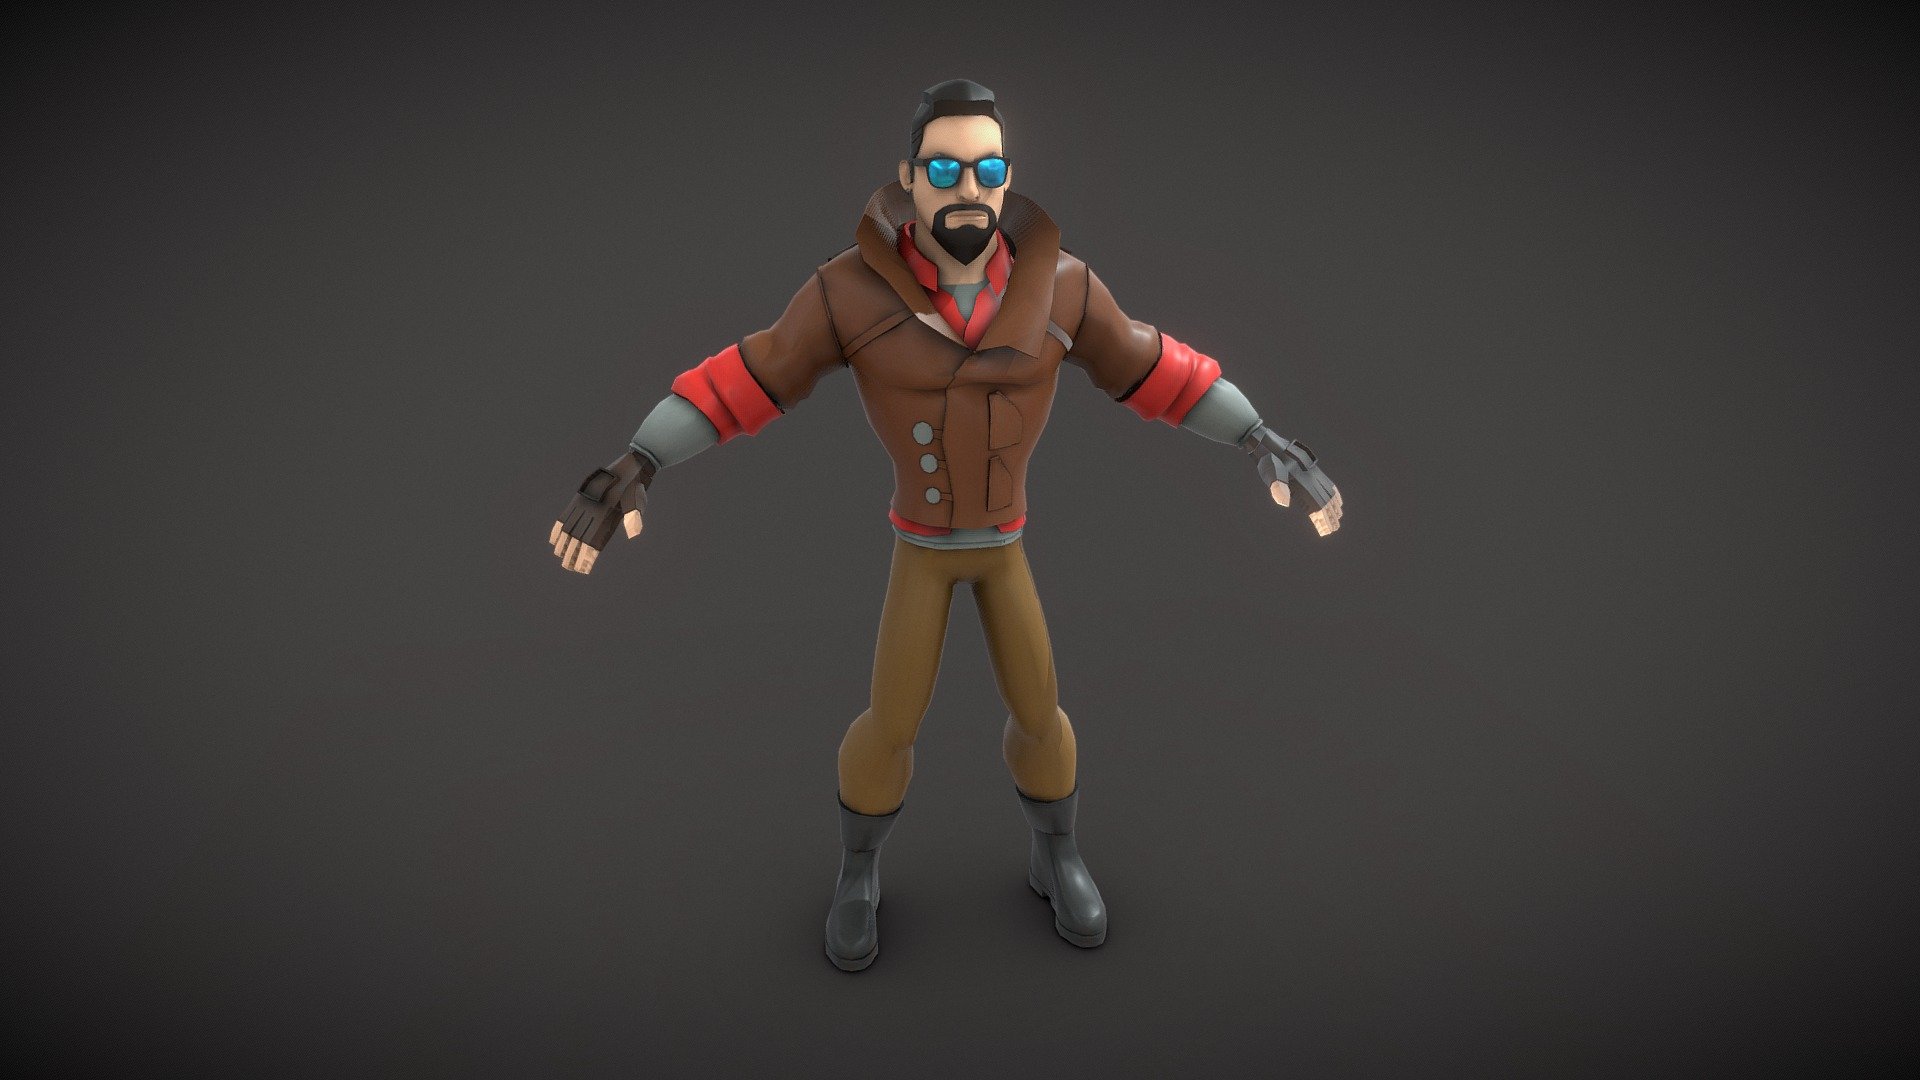 game ready asset lowpoly

not rigged

PBR textures Includes:




base

Normal

Occlusion

Roughness

Metalness
 - Game Character - 3D model by sharp4taim 3d model